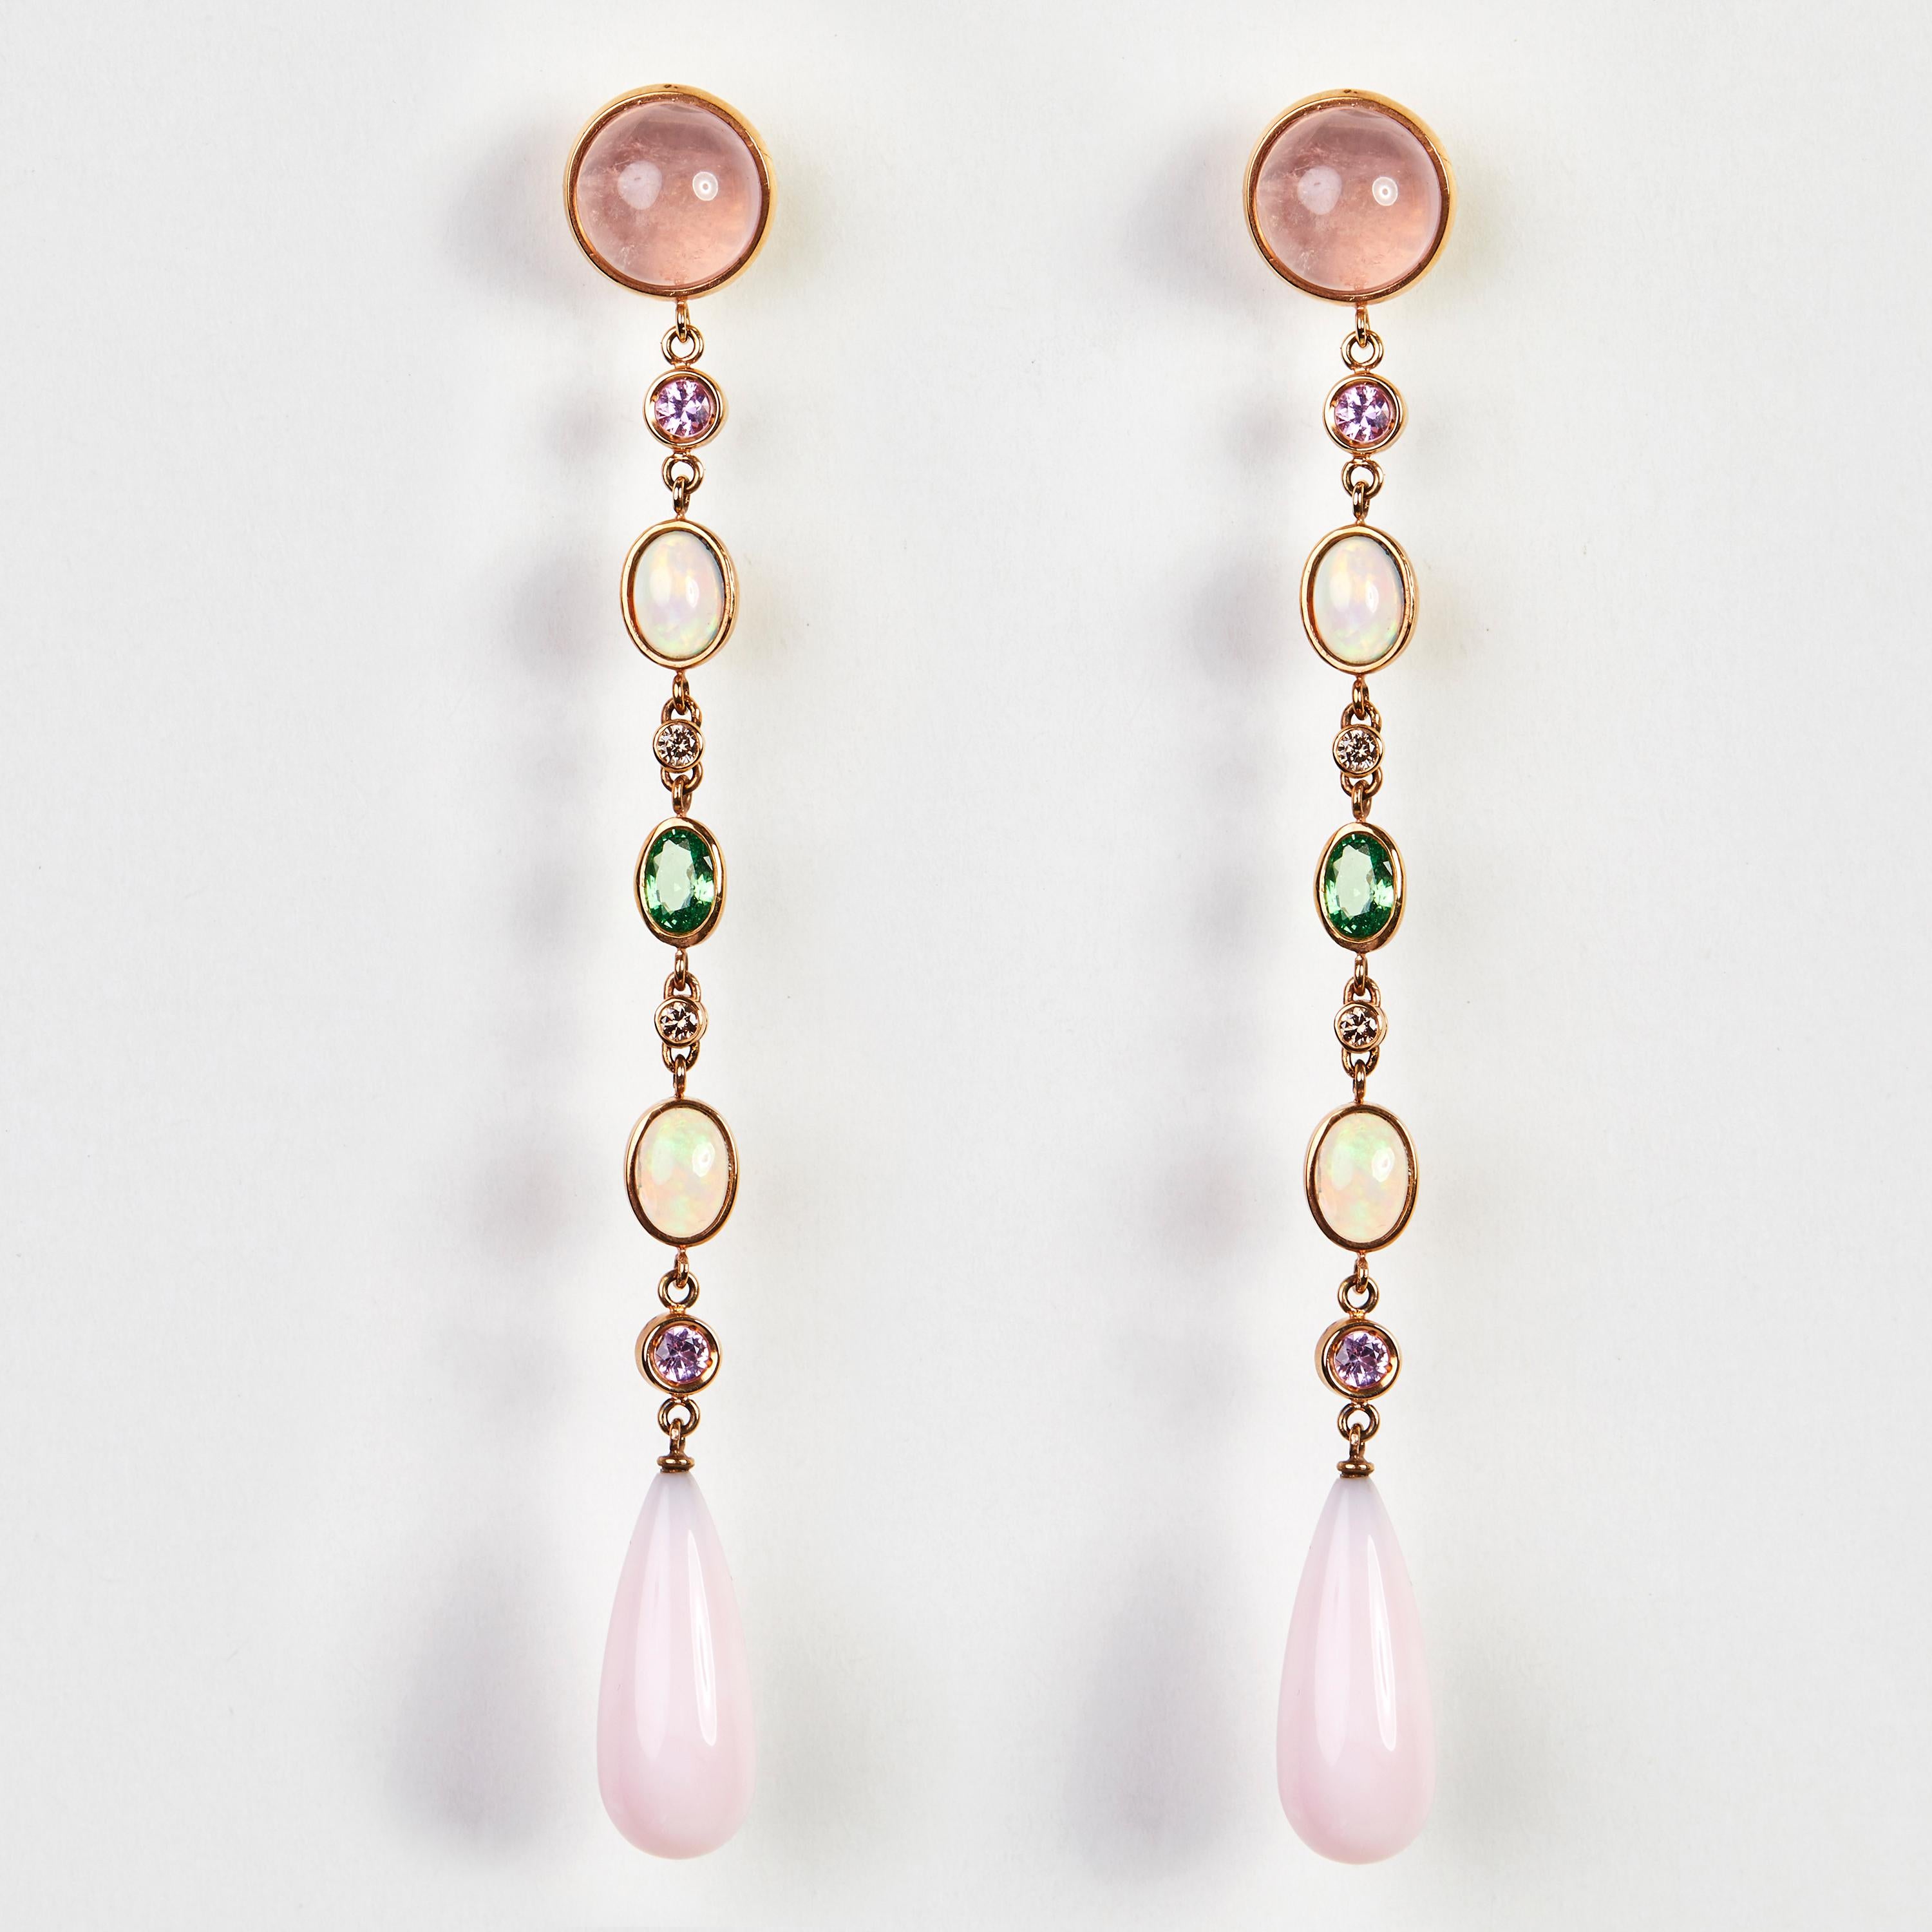 Earrings Rose Gold 18 K Gianni Lazzaro (Matching Rind Available)

Diamonds 4-0,20 ct HSI 
Pink Quartz 2-8,27 ct
Opale 4-2,39 ct
Green Carnet 2- 1 ct
Rose Sapphire 4-0,56 ct
Rose Opal 2-17,26 ct.

With a heritage of ancient fine Swiss jewelry